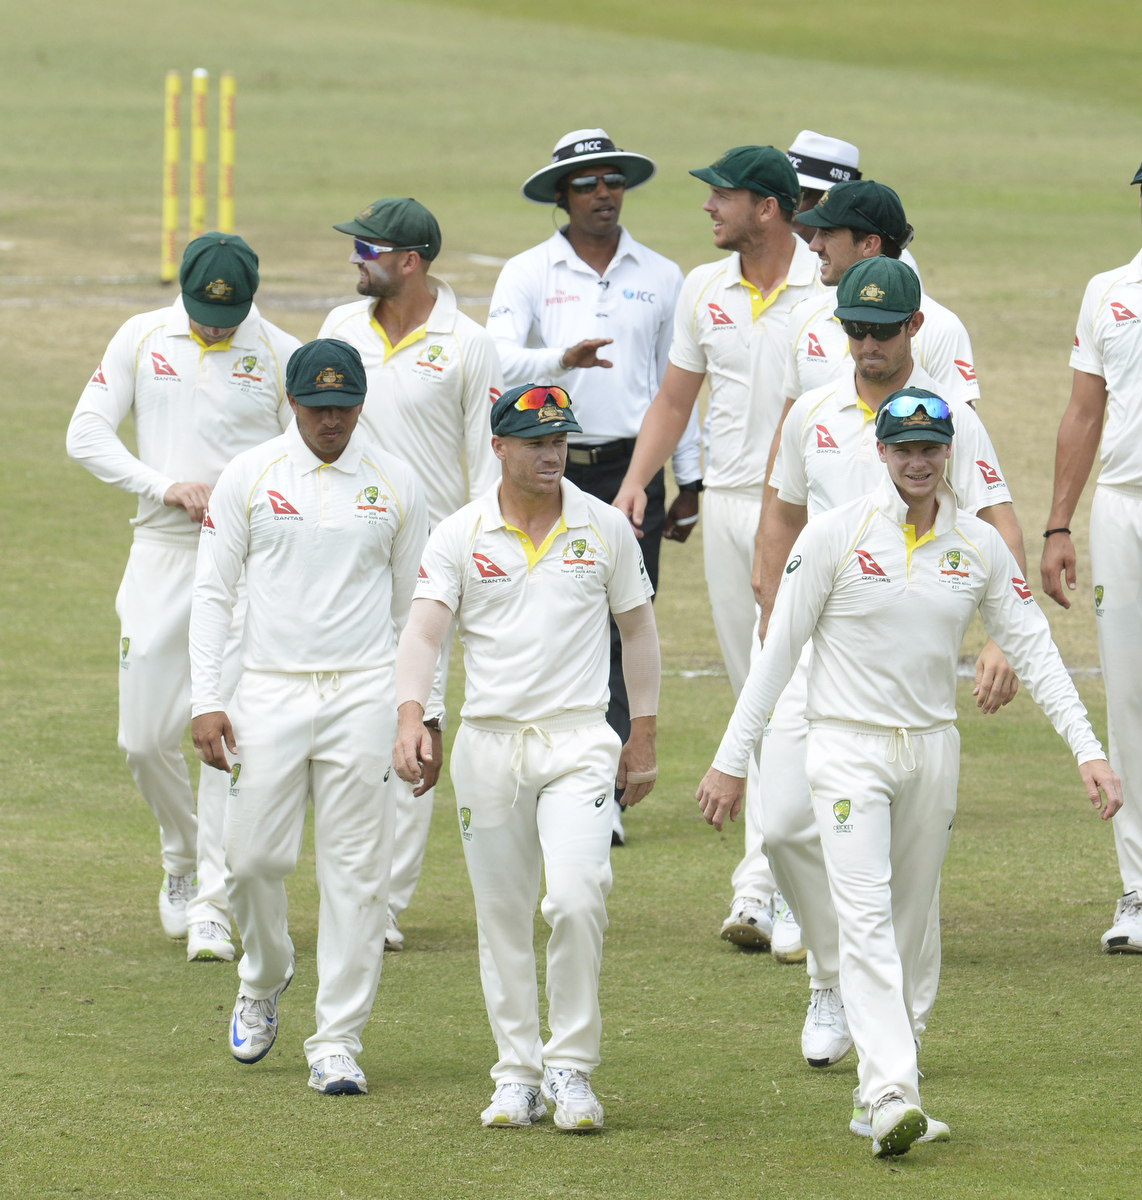 The Australian team. Pic: Lee Warren/Gallo Images/Getty Images